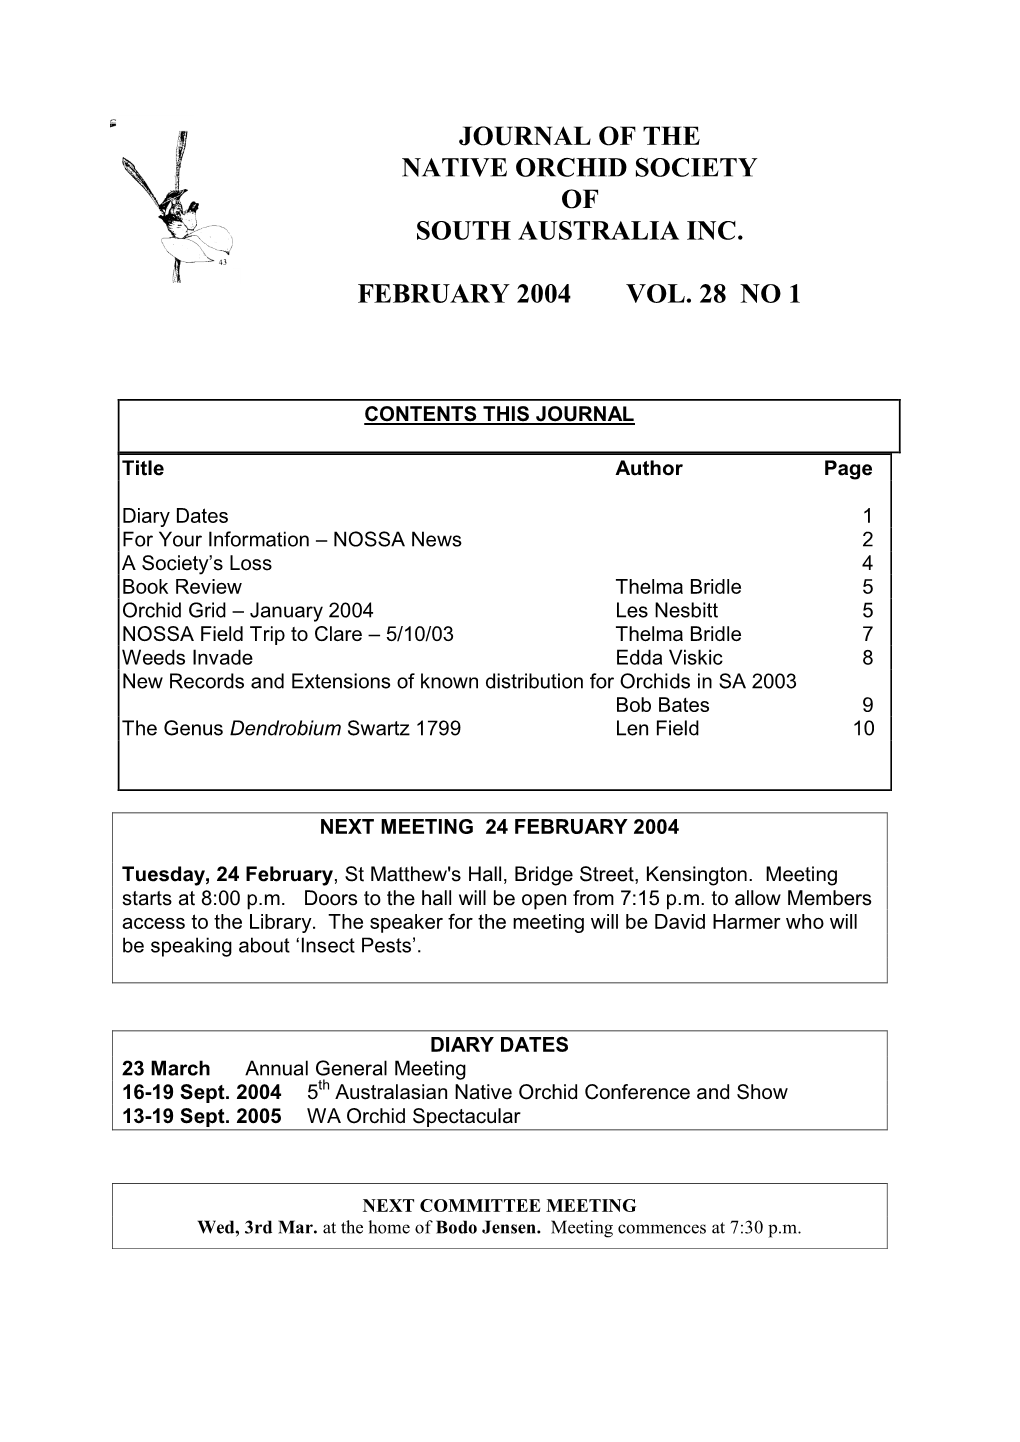 Journal of the Native Orchid Society of South Australia Inc